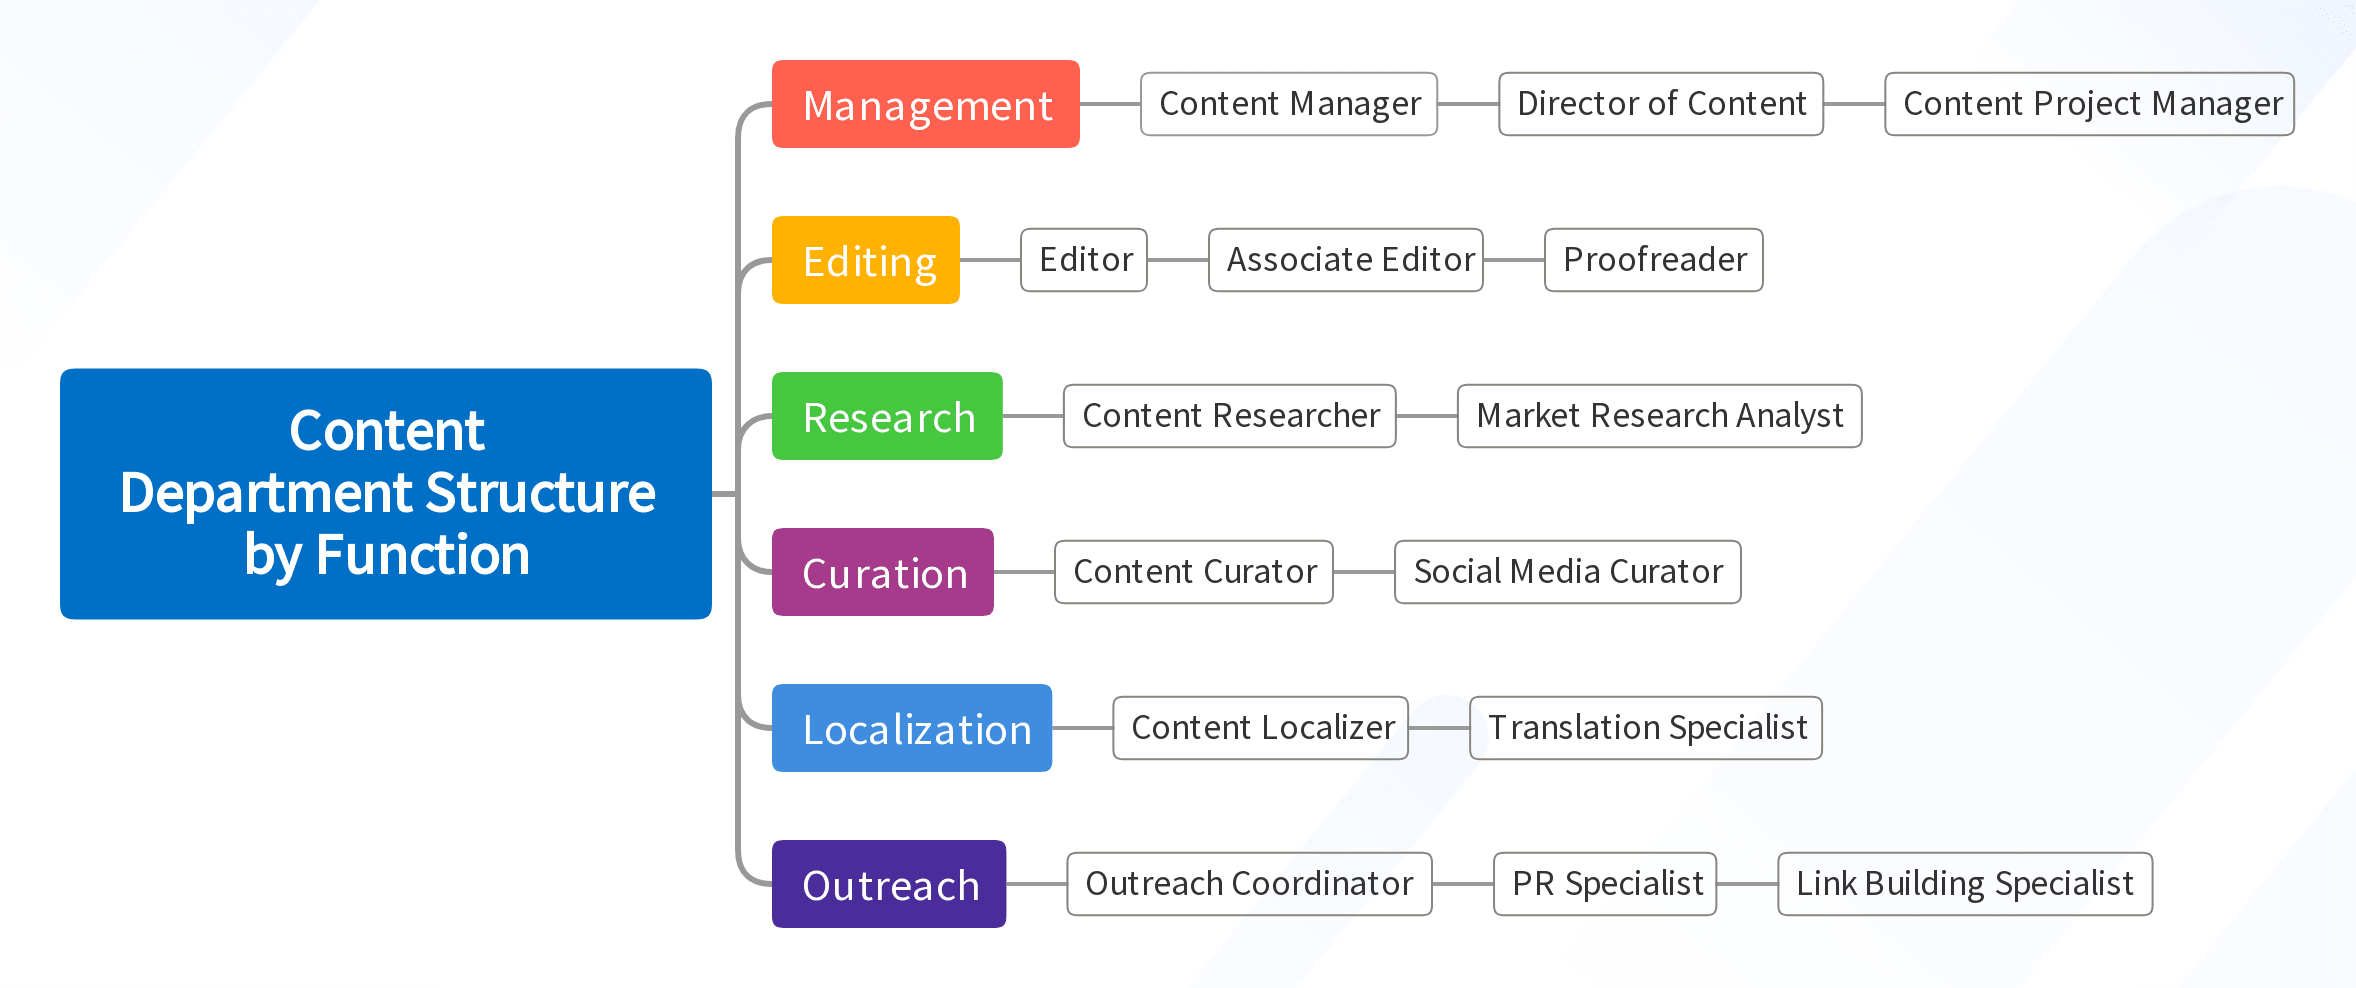 Content Department Structure by Function